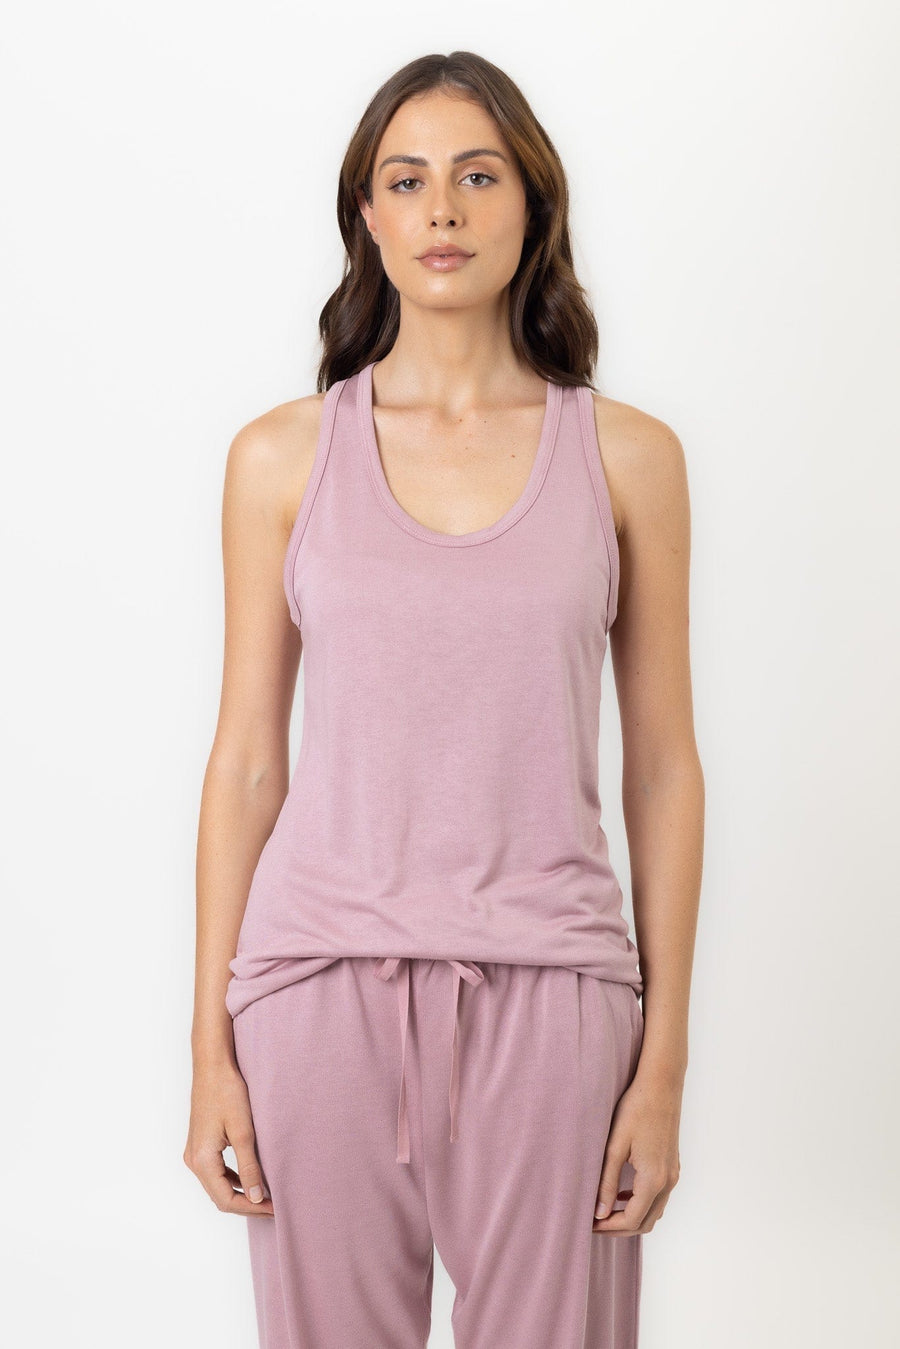 Twilight Top | Blush Pink Twighlight Top Tops Pajamas Australia Online | Reverie the Label  TOPS Twilight Top